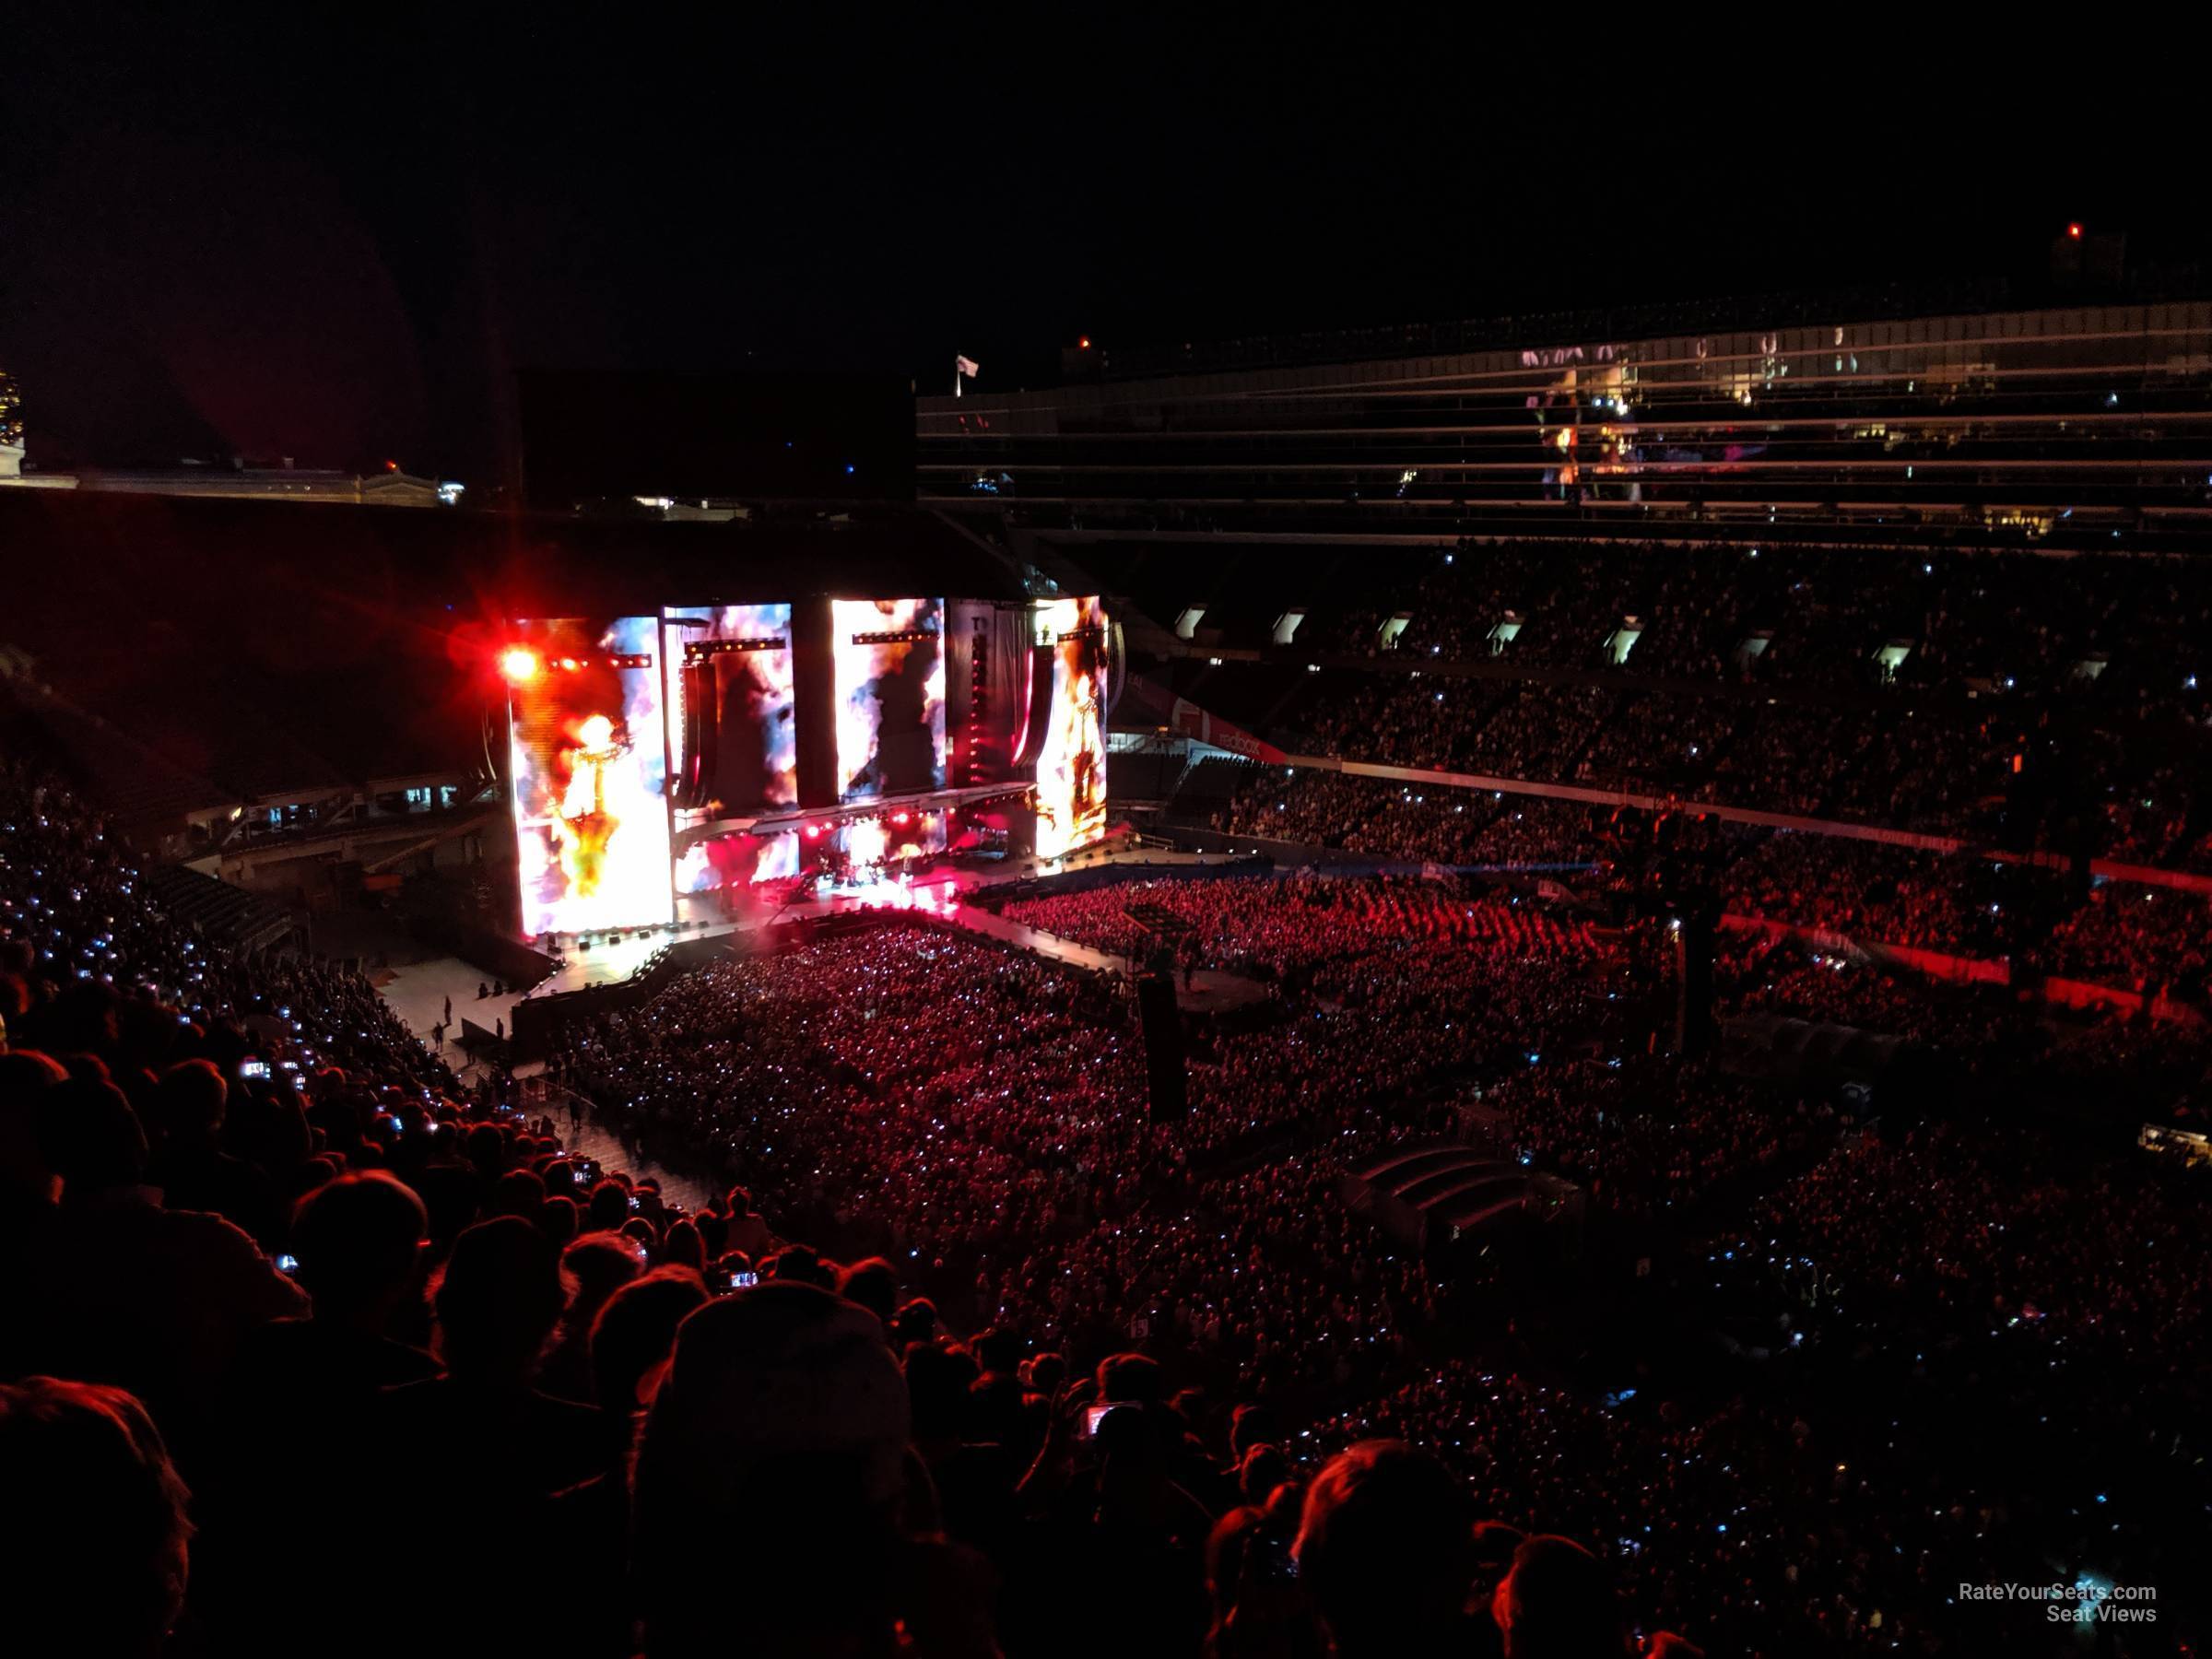 section 432, row 16 seat view  for concert - soldier field